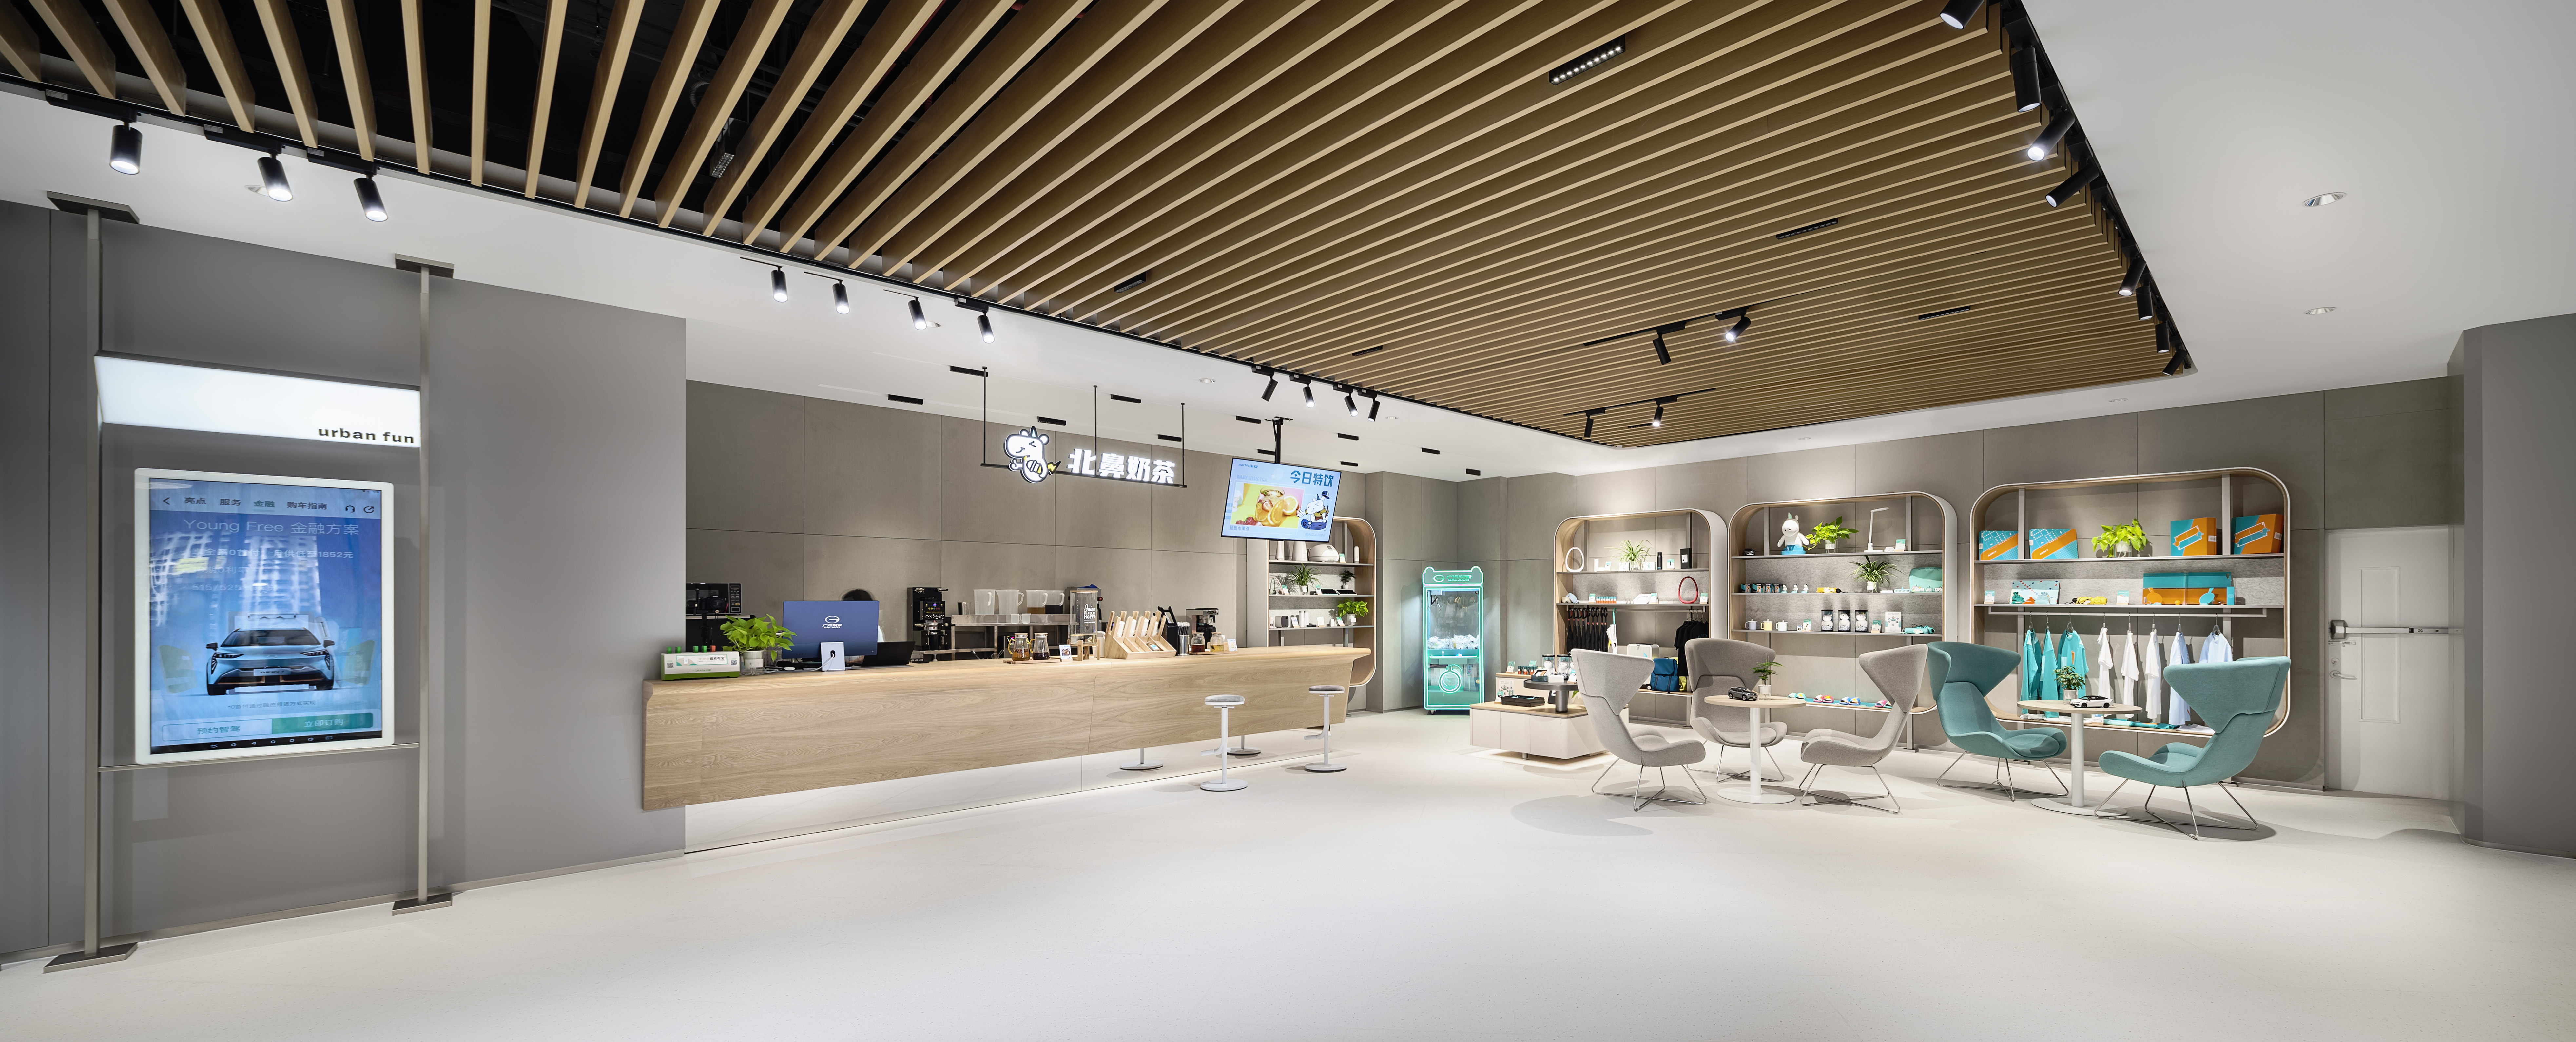 MUSE Design Winners - AION Experience Center